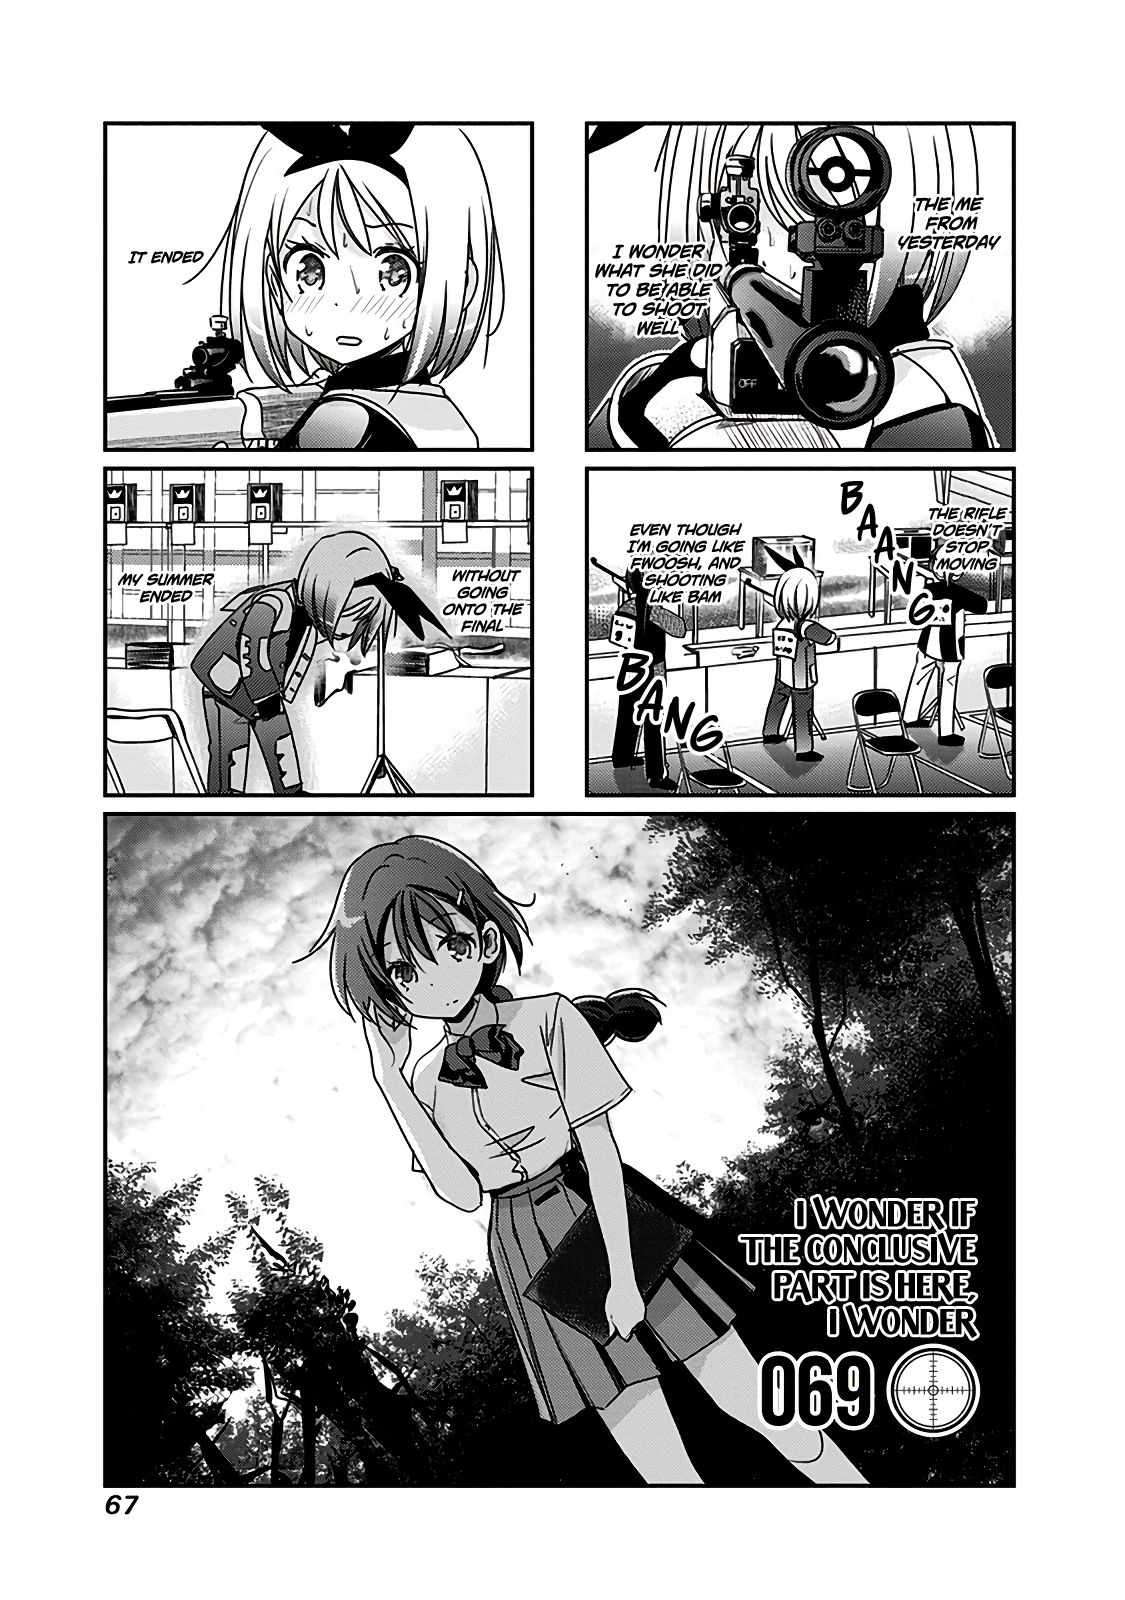 Rifle Is Beautiful Vol.4 Chapter 69: I Wonder If The Conclusive Part Is Here, I Wonder - Picture 2